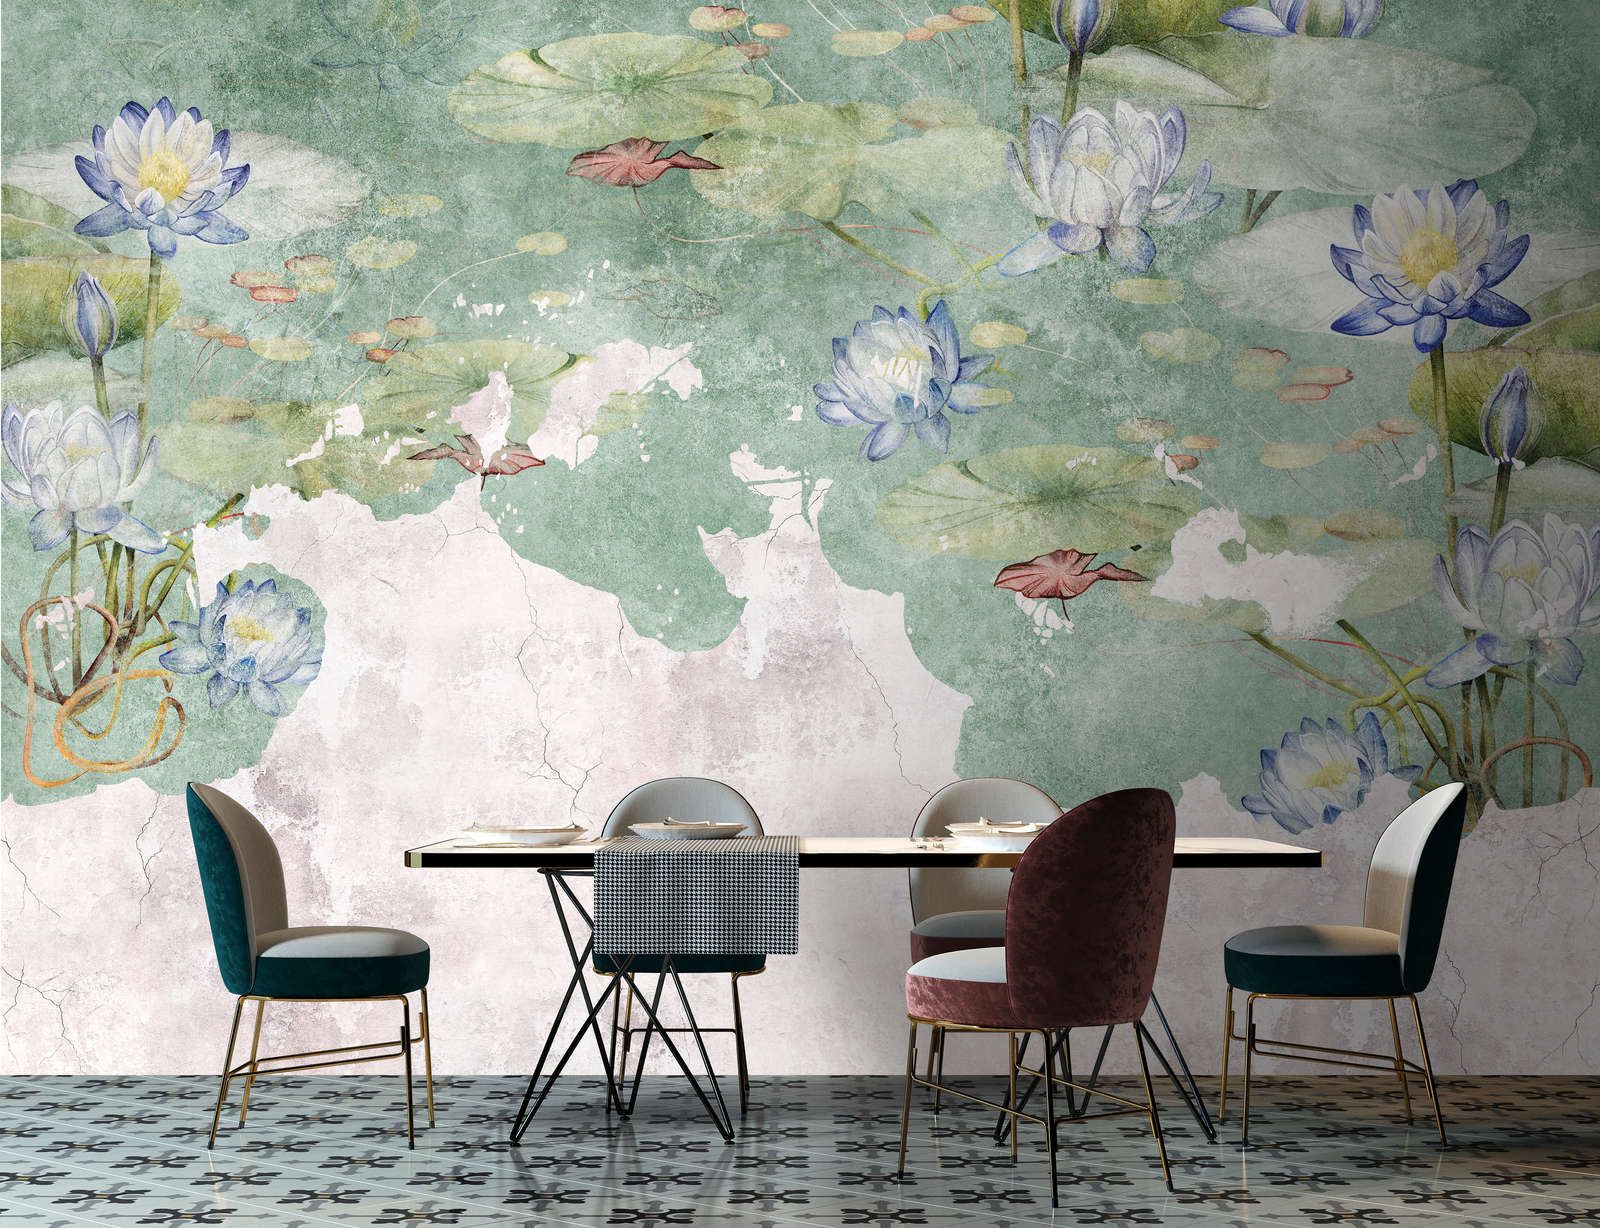             Photo wallpaper »lily« - Water lilies on vintage plaster structure in the background - Matt, smooth non-woven fabric
        